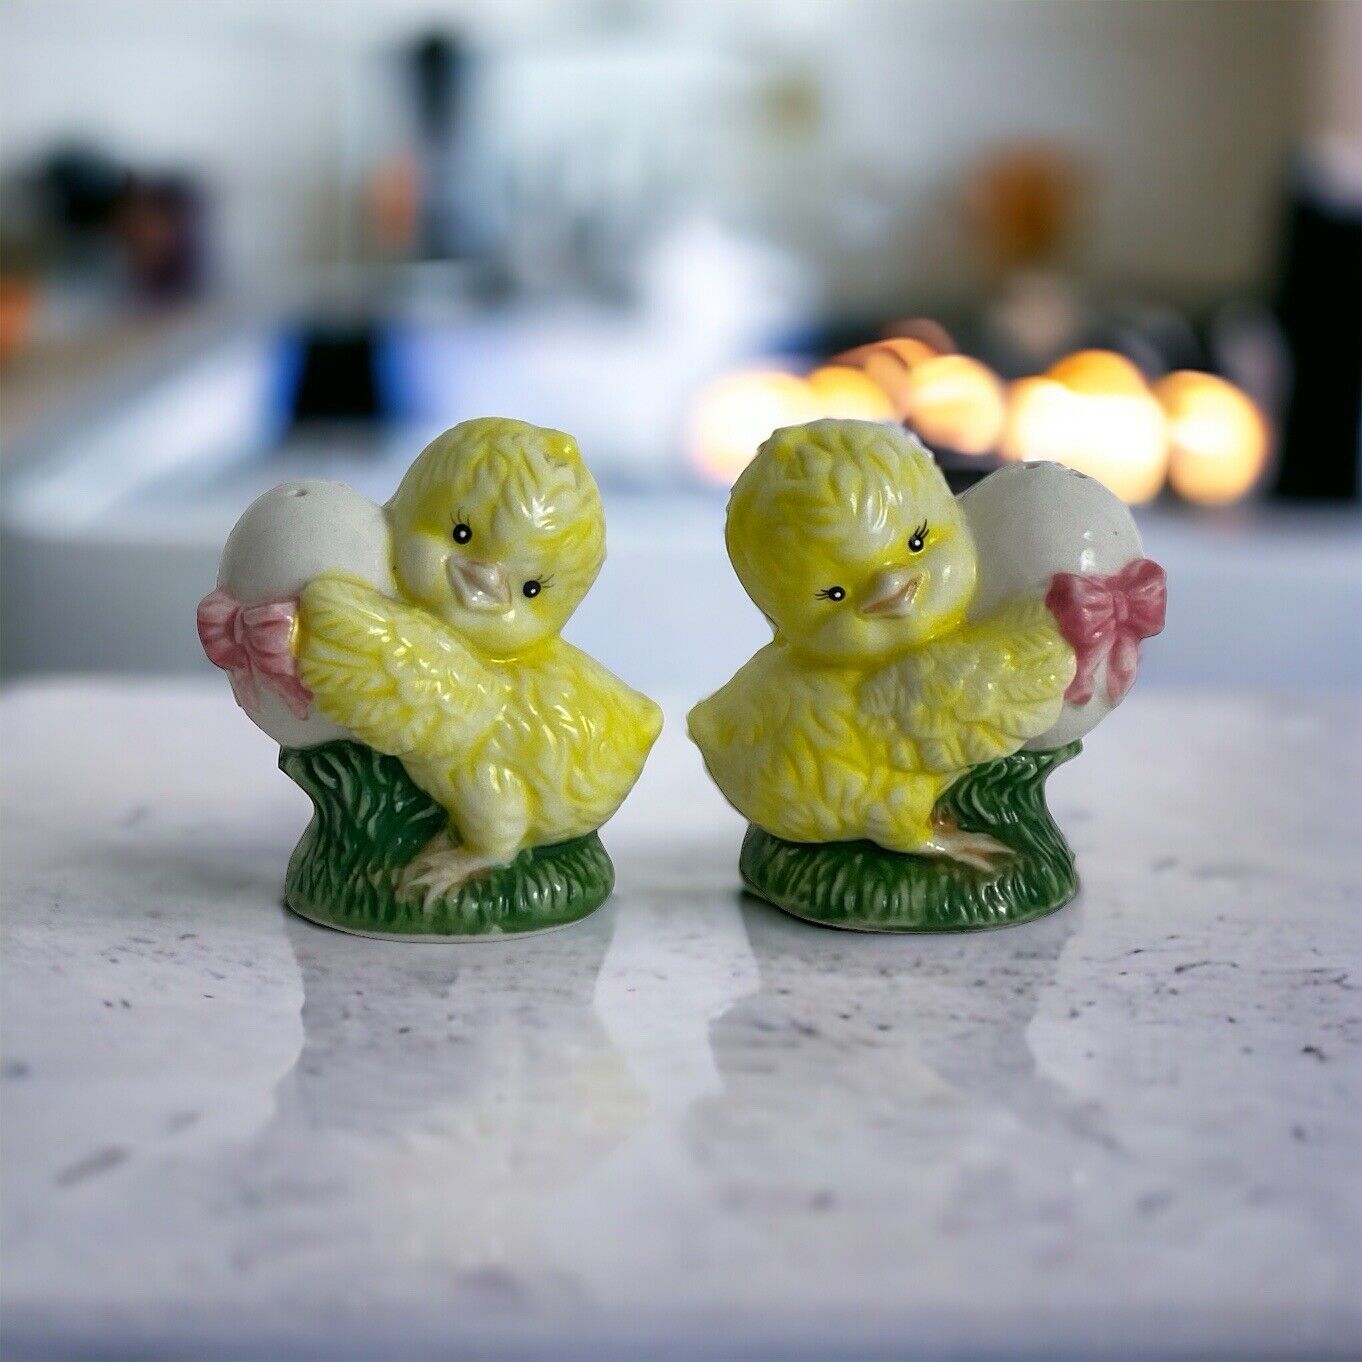 Vintage Made in Japan Realistic Baby Chicks Salt & Pepper Shakers Set 50s Decor